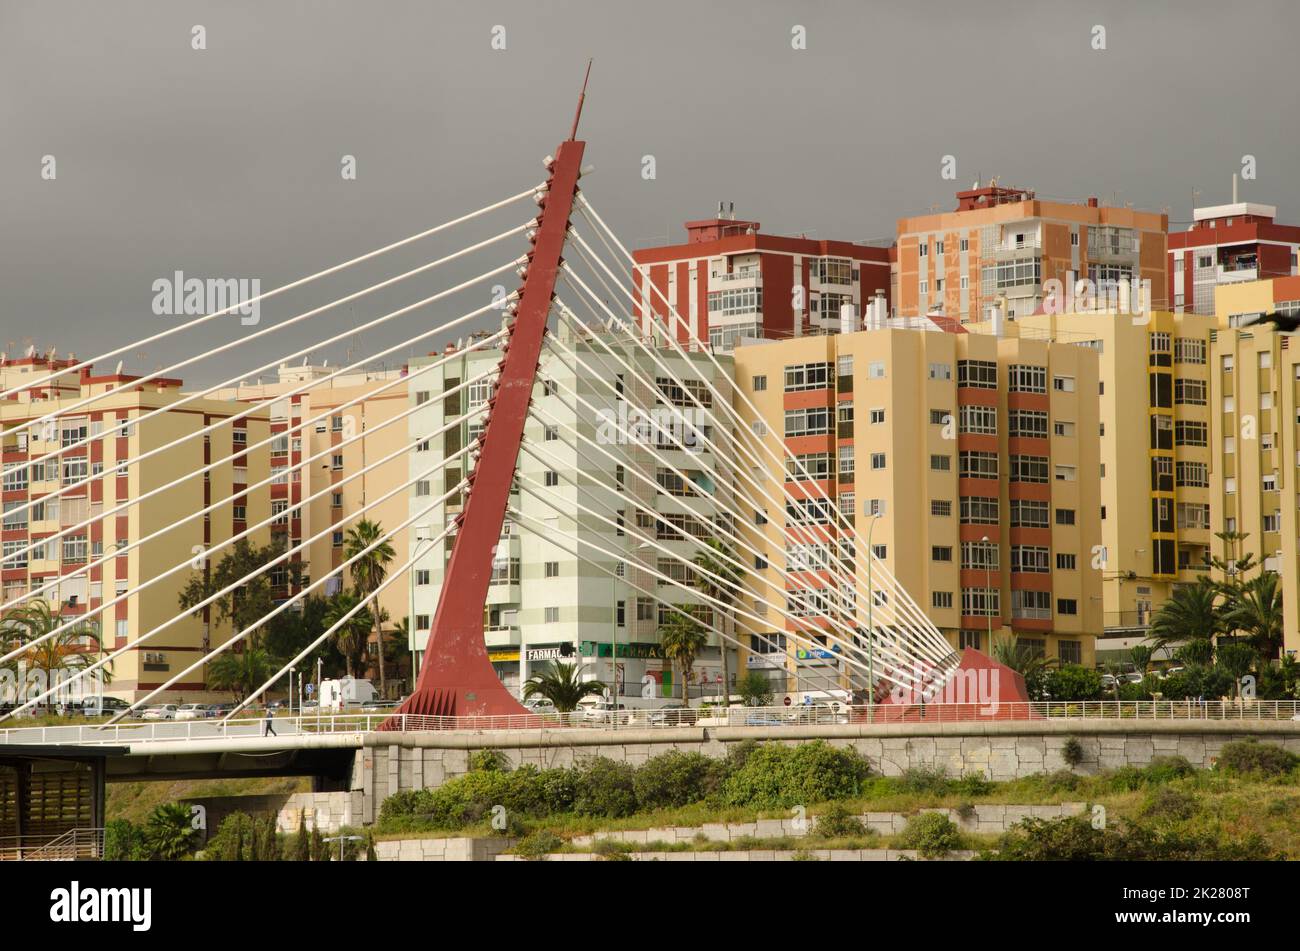 Cable-stayed bridge over a ravine and buildings. Stock Photo